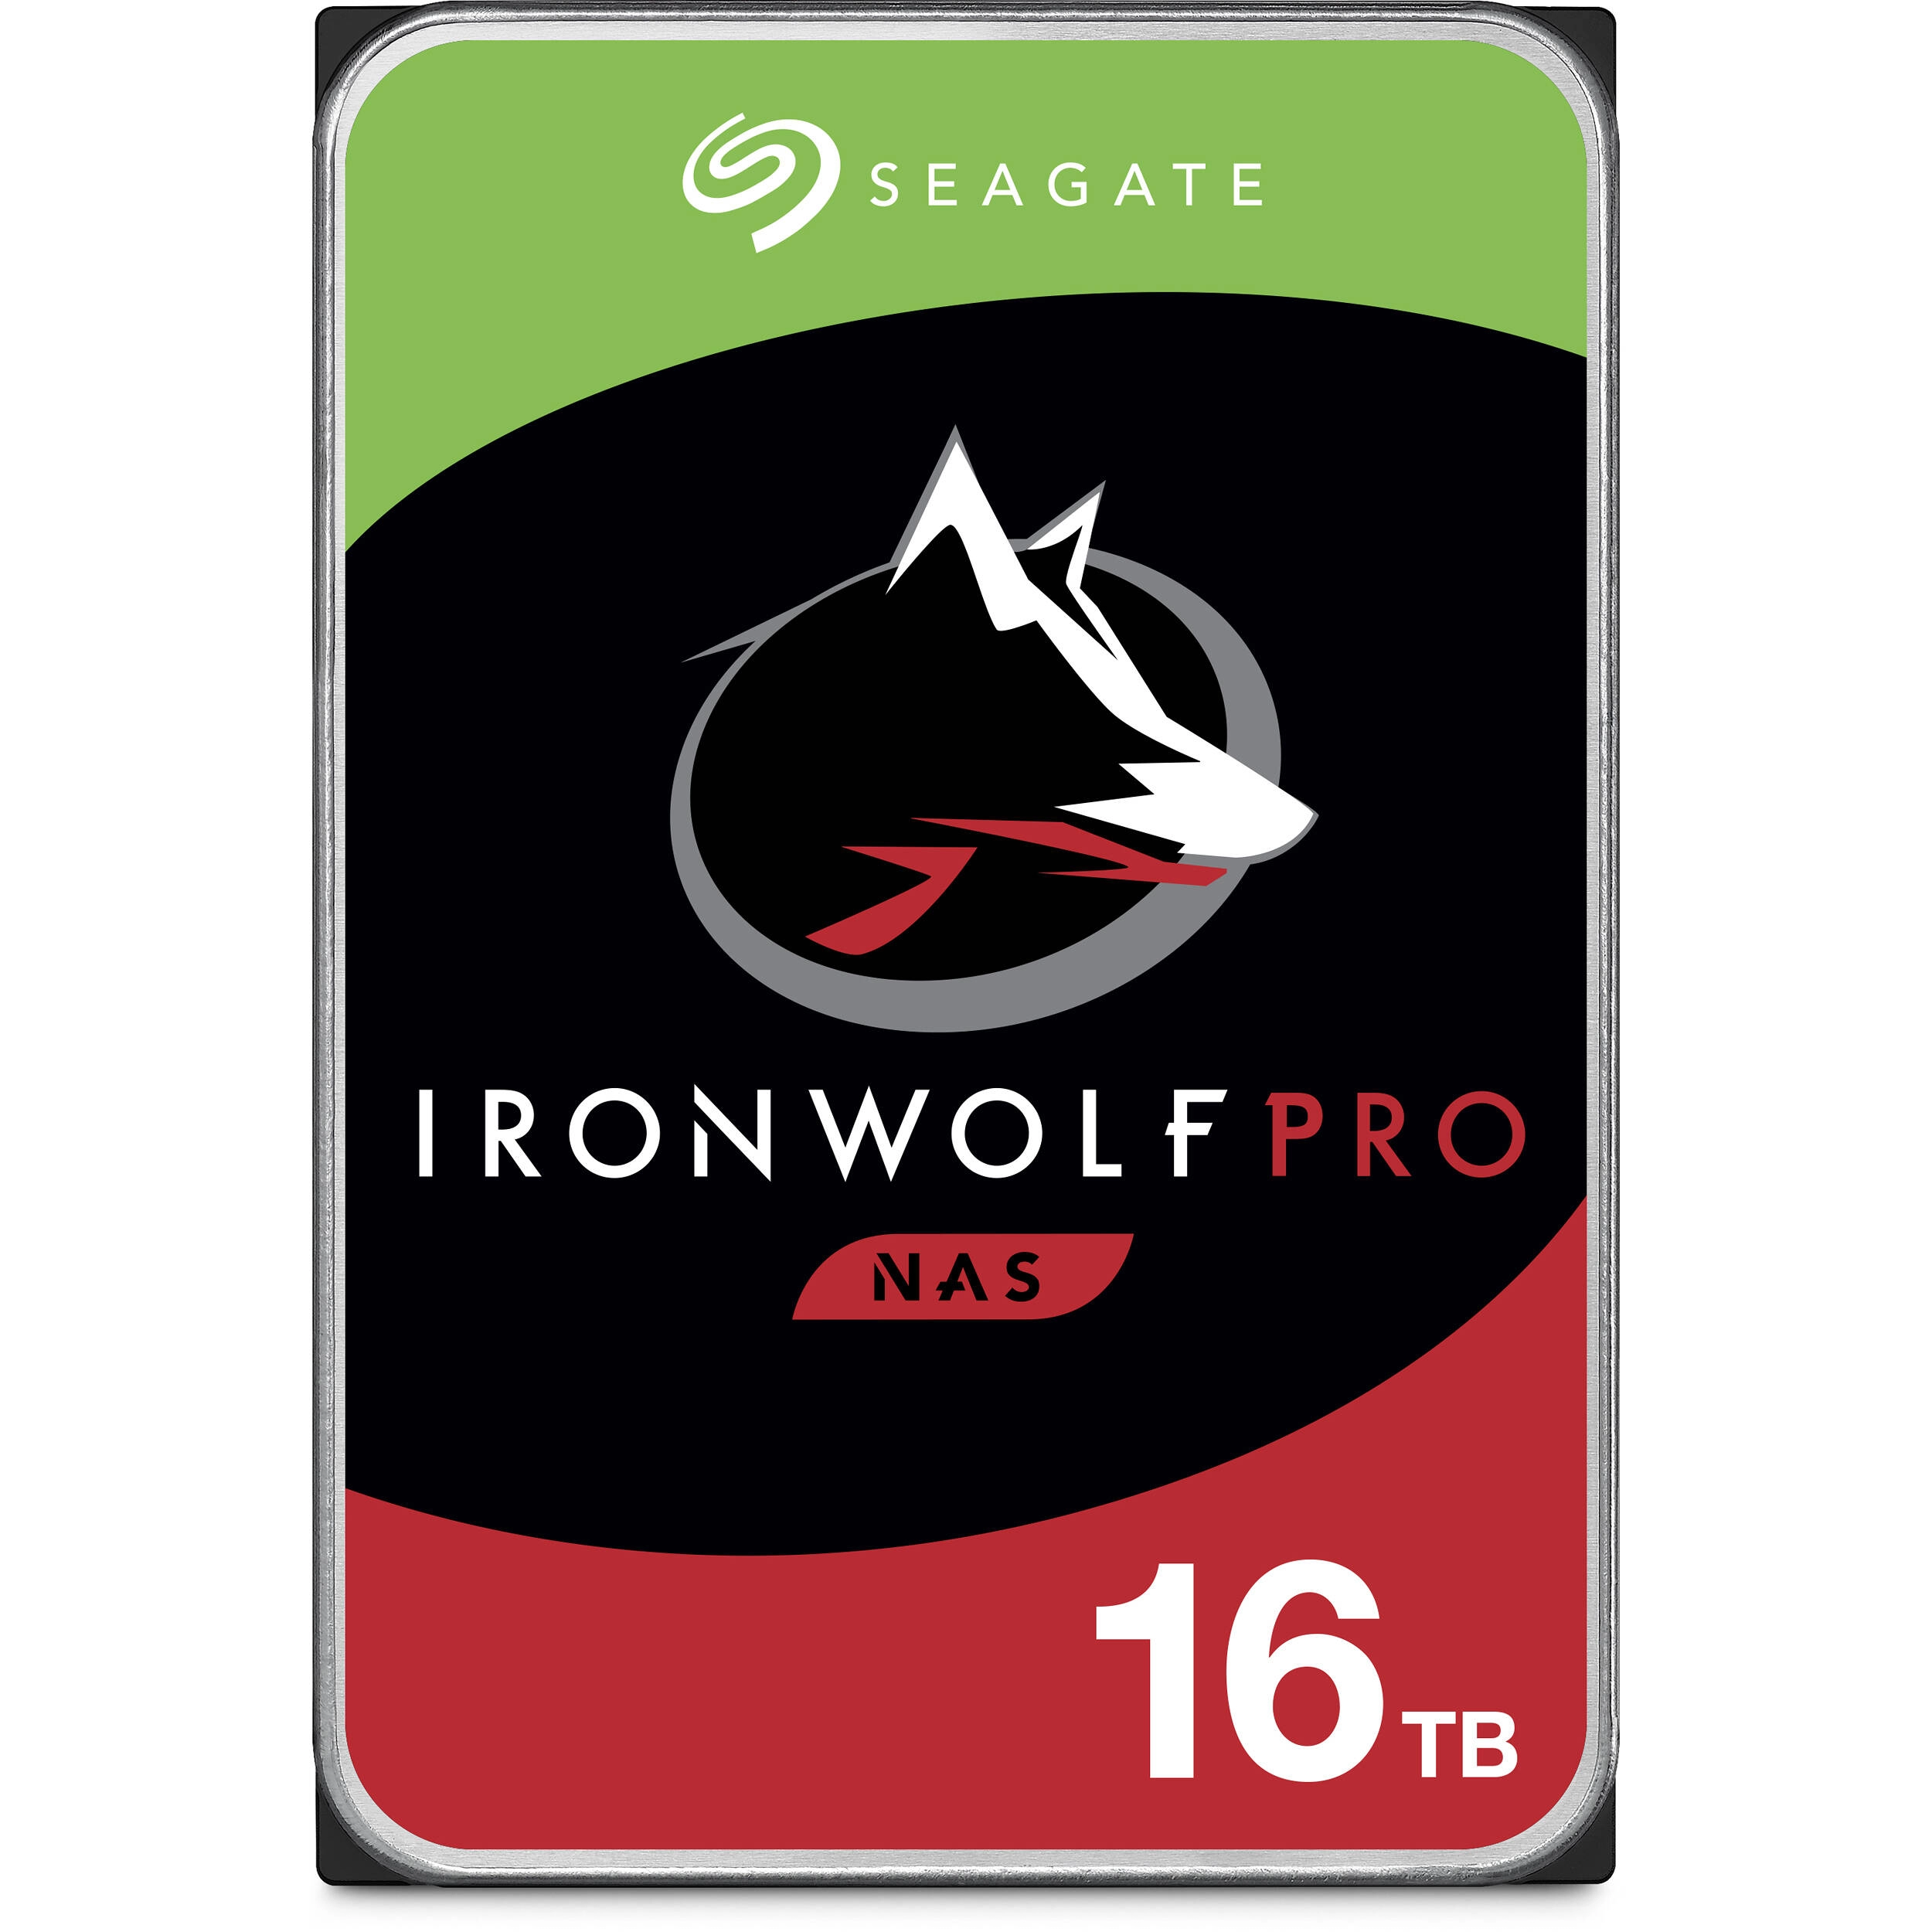 SEAGATE IronWolf PRO NAS HDD 16TB, ST16000NT001, 256MB cache, SATA 6Gb/s, 7200 rpm, 24/7